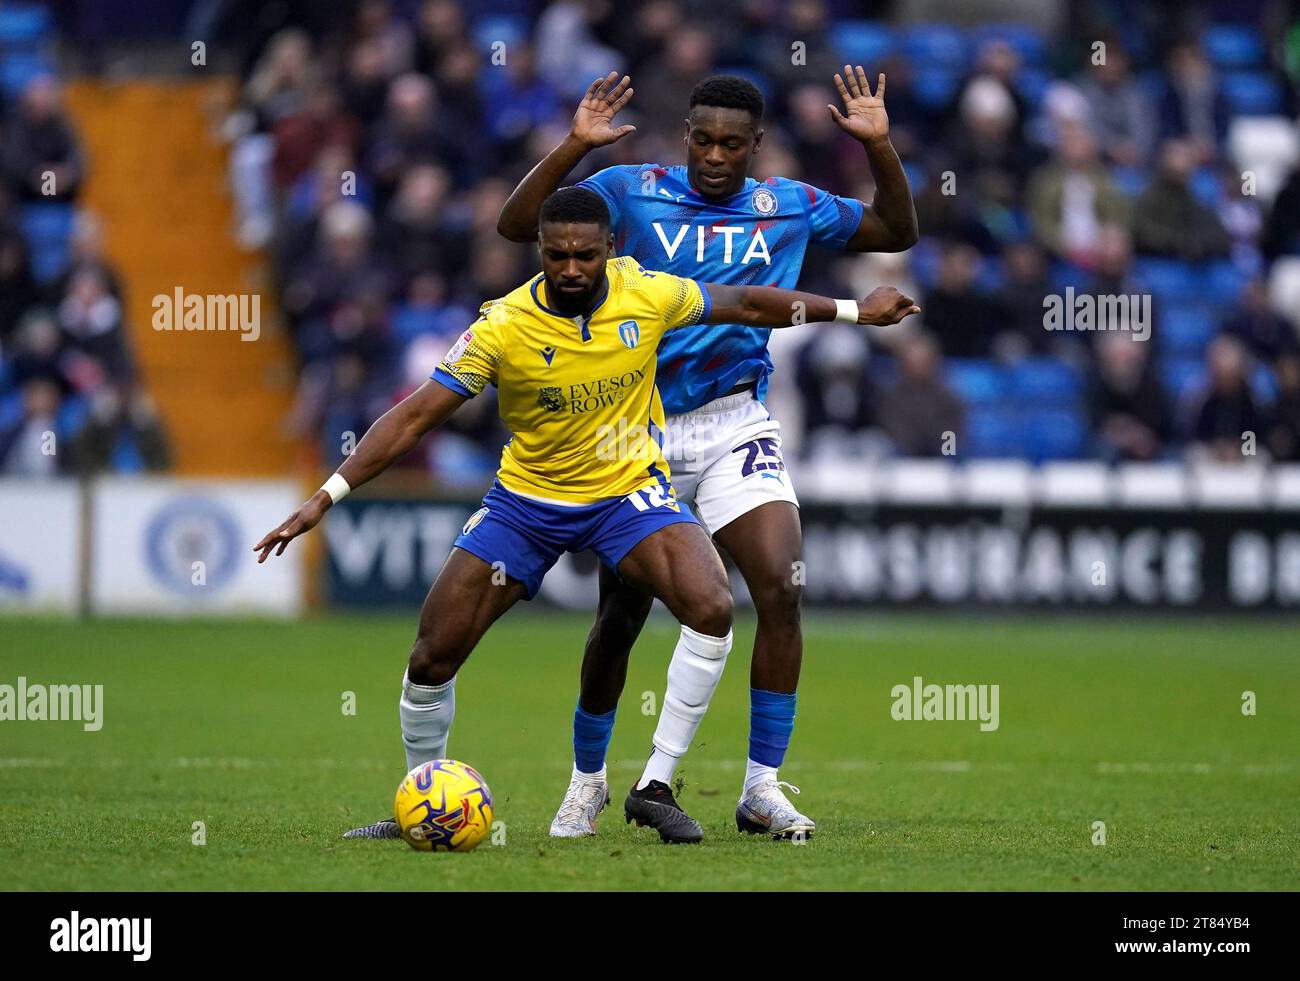 Colchester United's Mandela Egbo (left) and Stockport County's Isaac Olaofe battle for the ball during the Sky Bet League Two match at Edgeley Park, Stockport. Picture date: Saturday November 18, 2023. Stock Photo